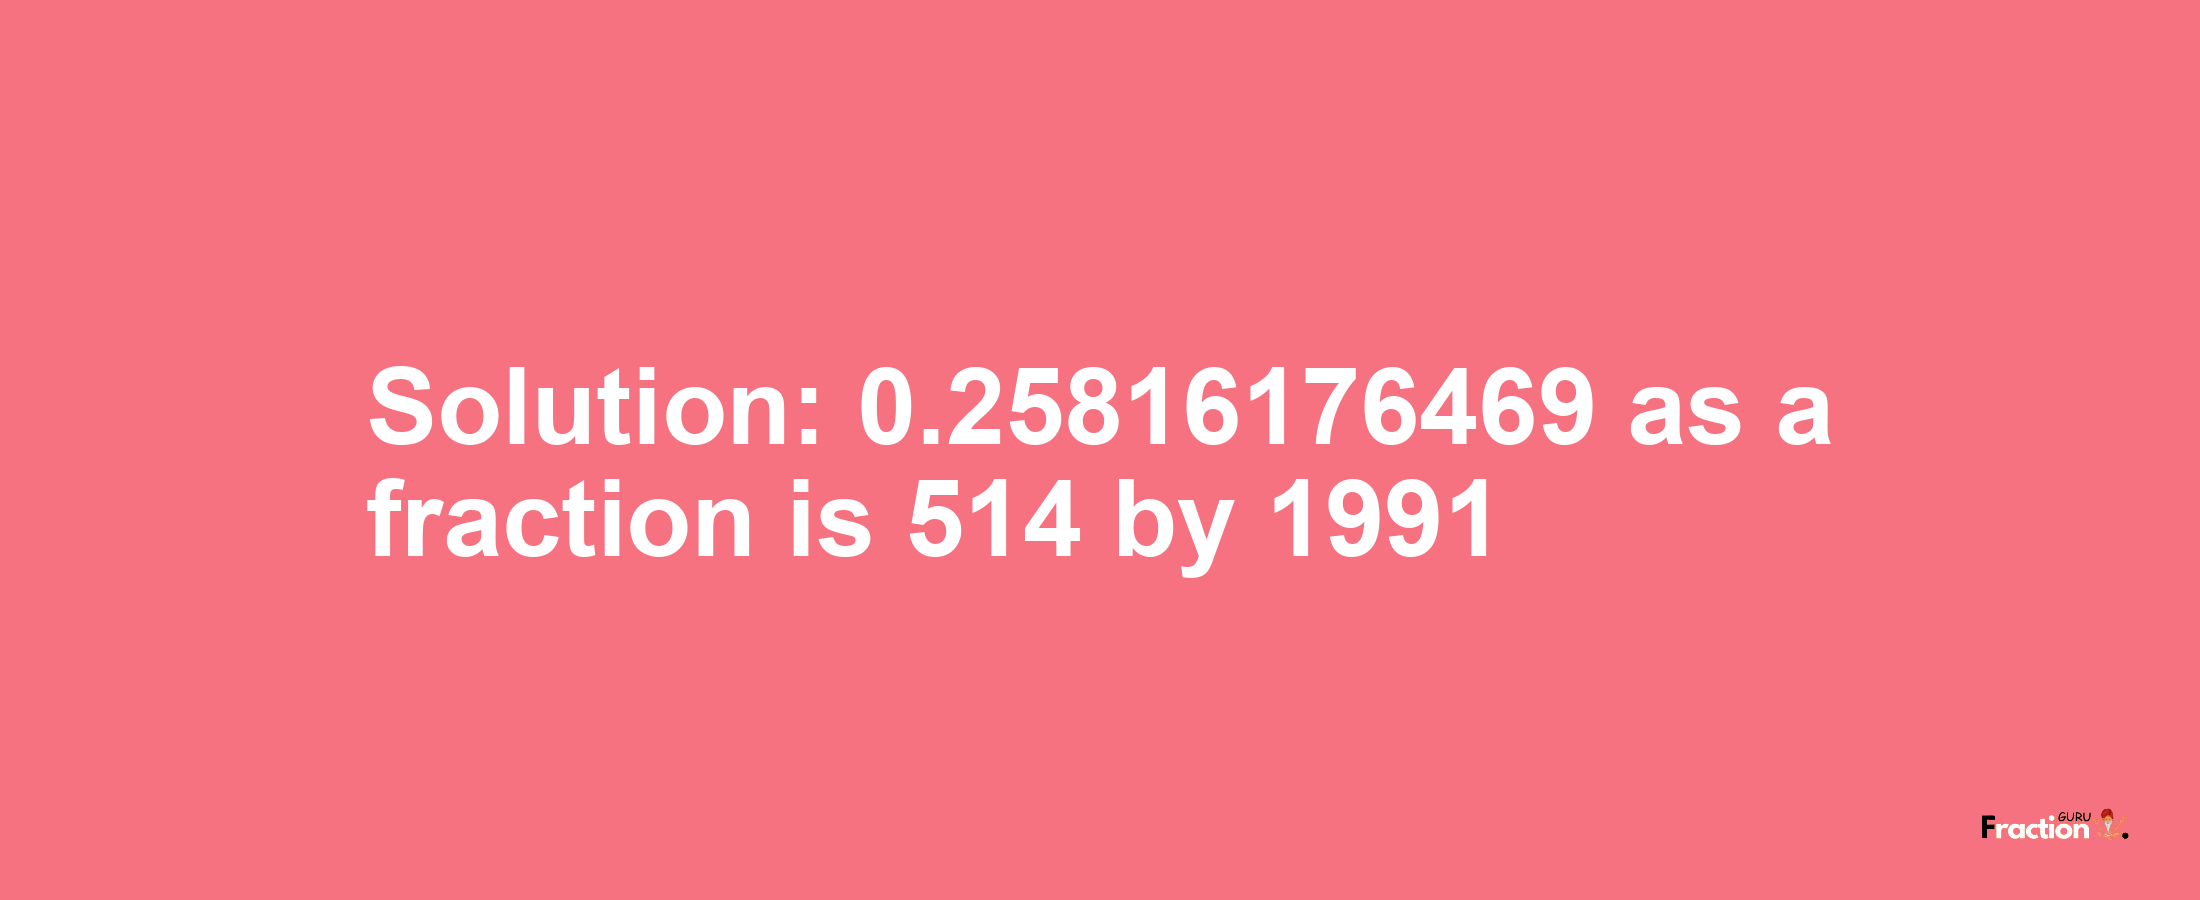 Solution:0.25816176469 as a fraction is 514/1991